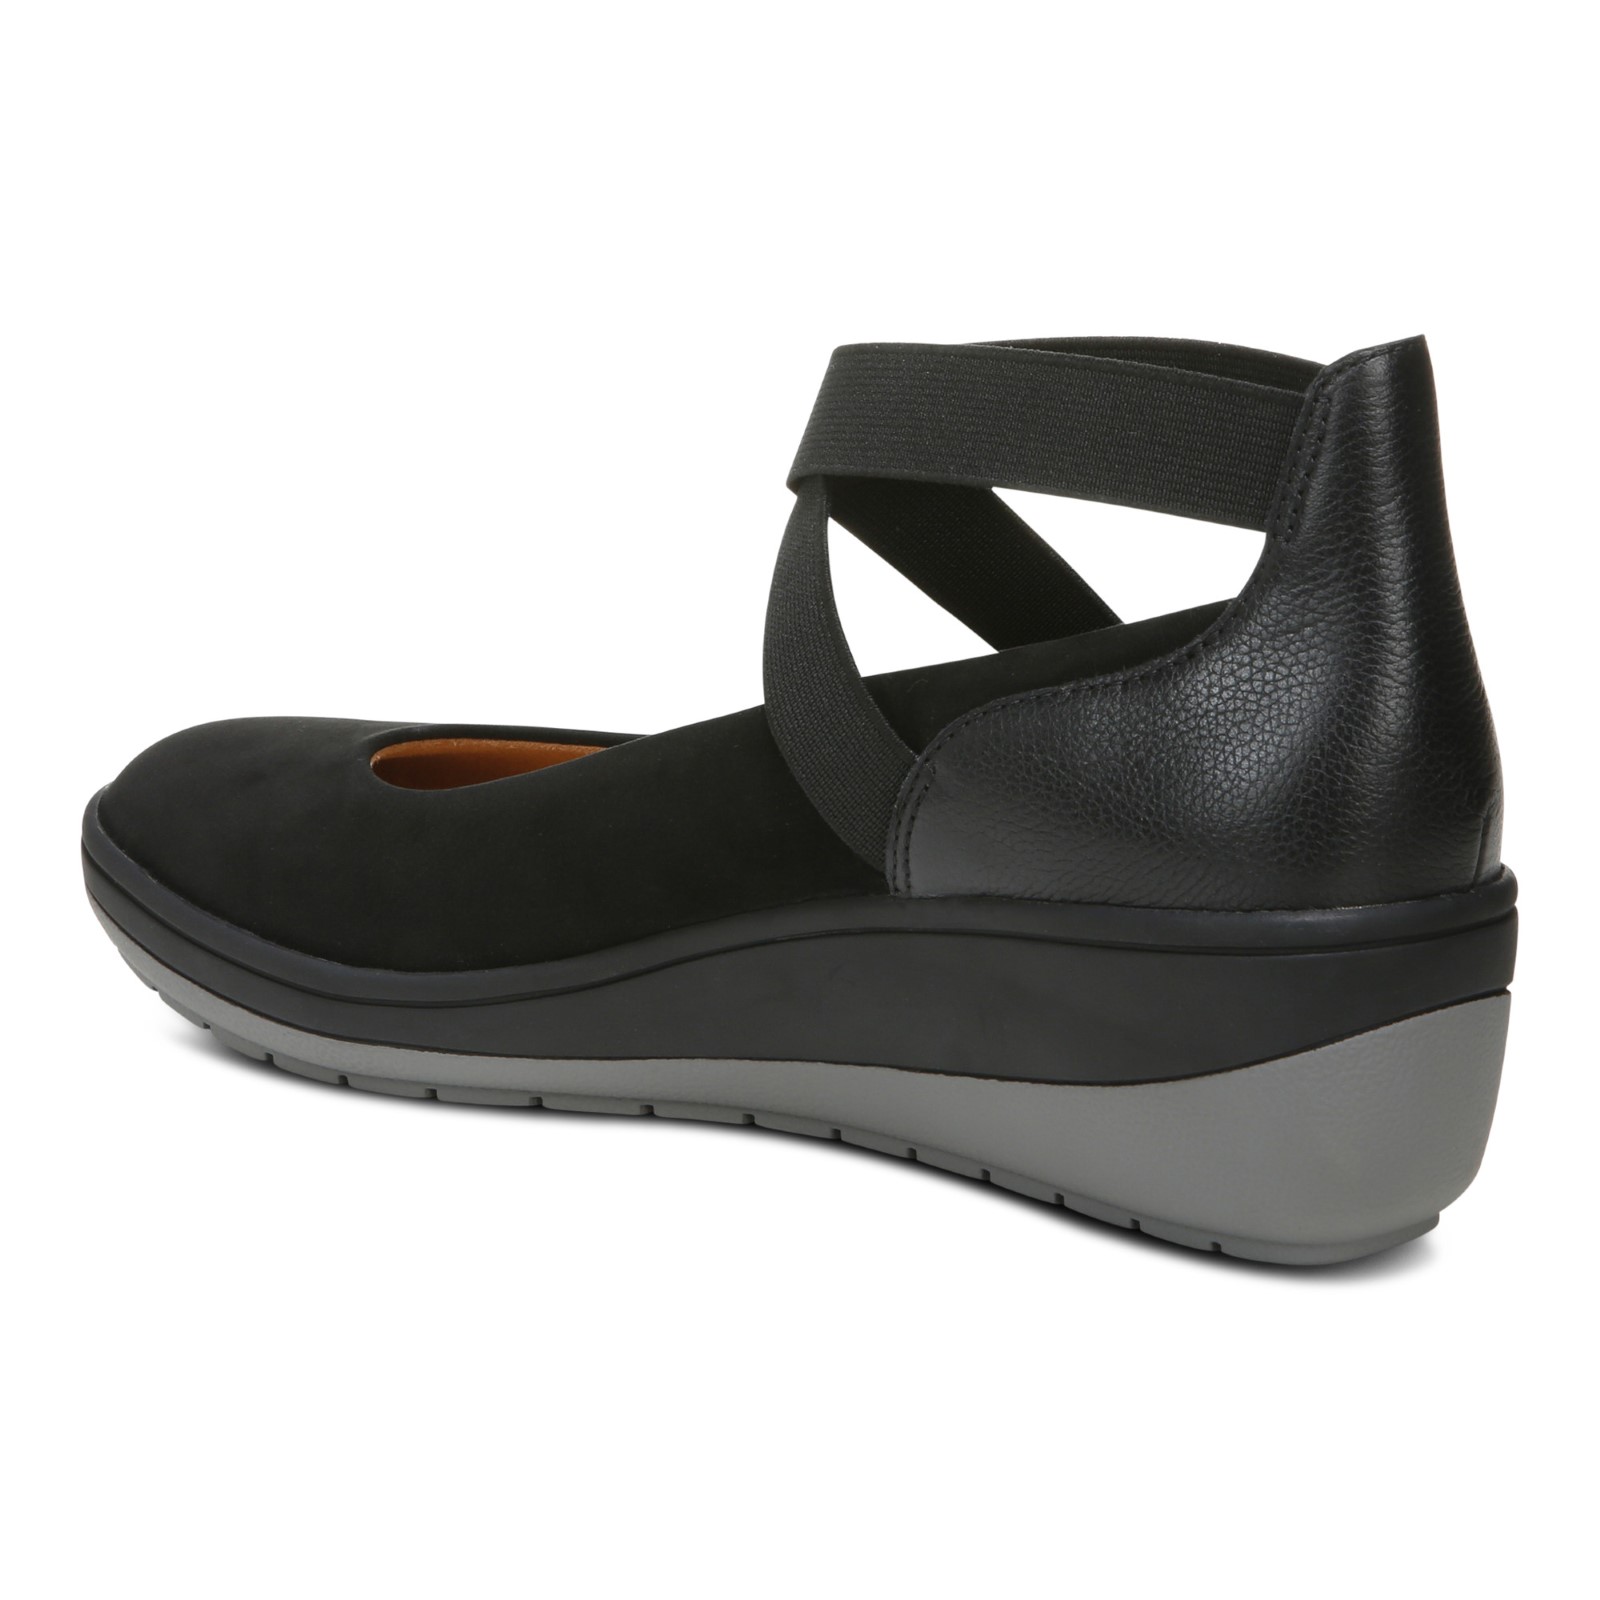 Vionic Ellery Women's Supportive Wedge - Free Shipping